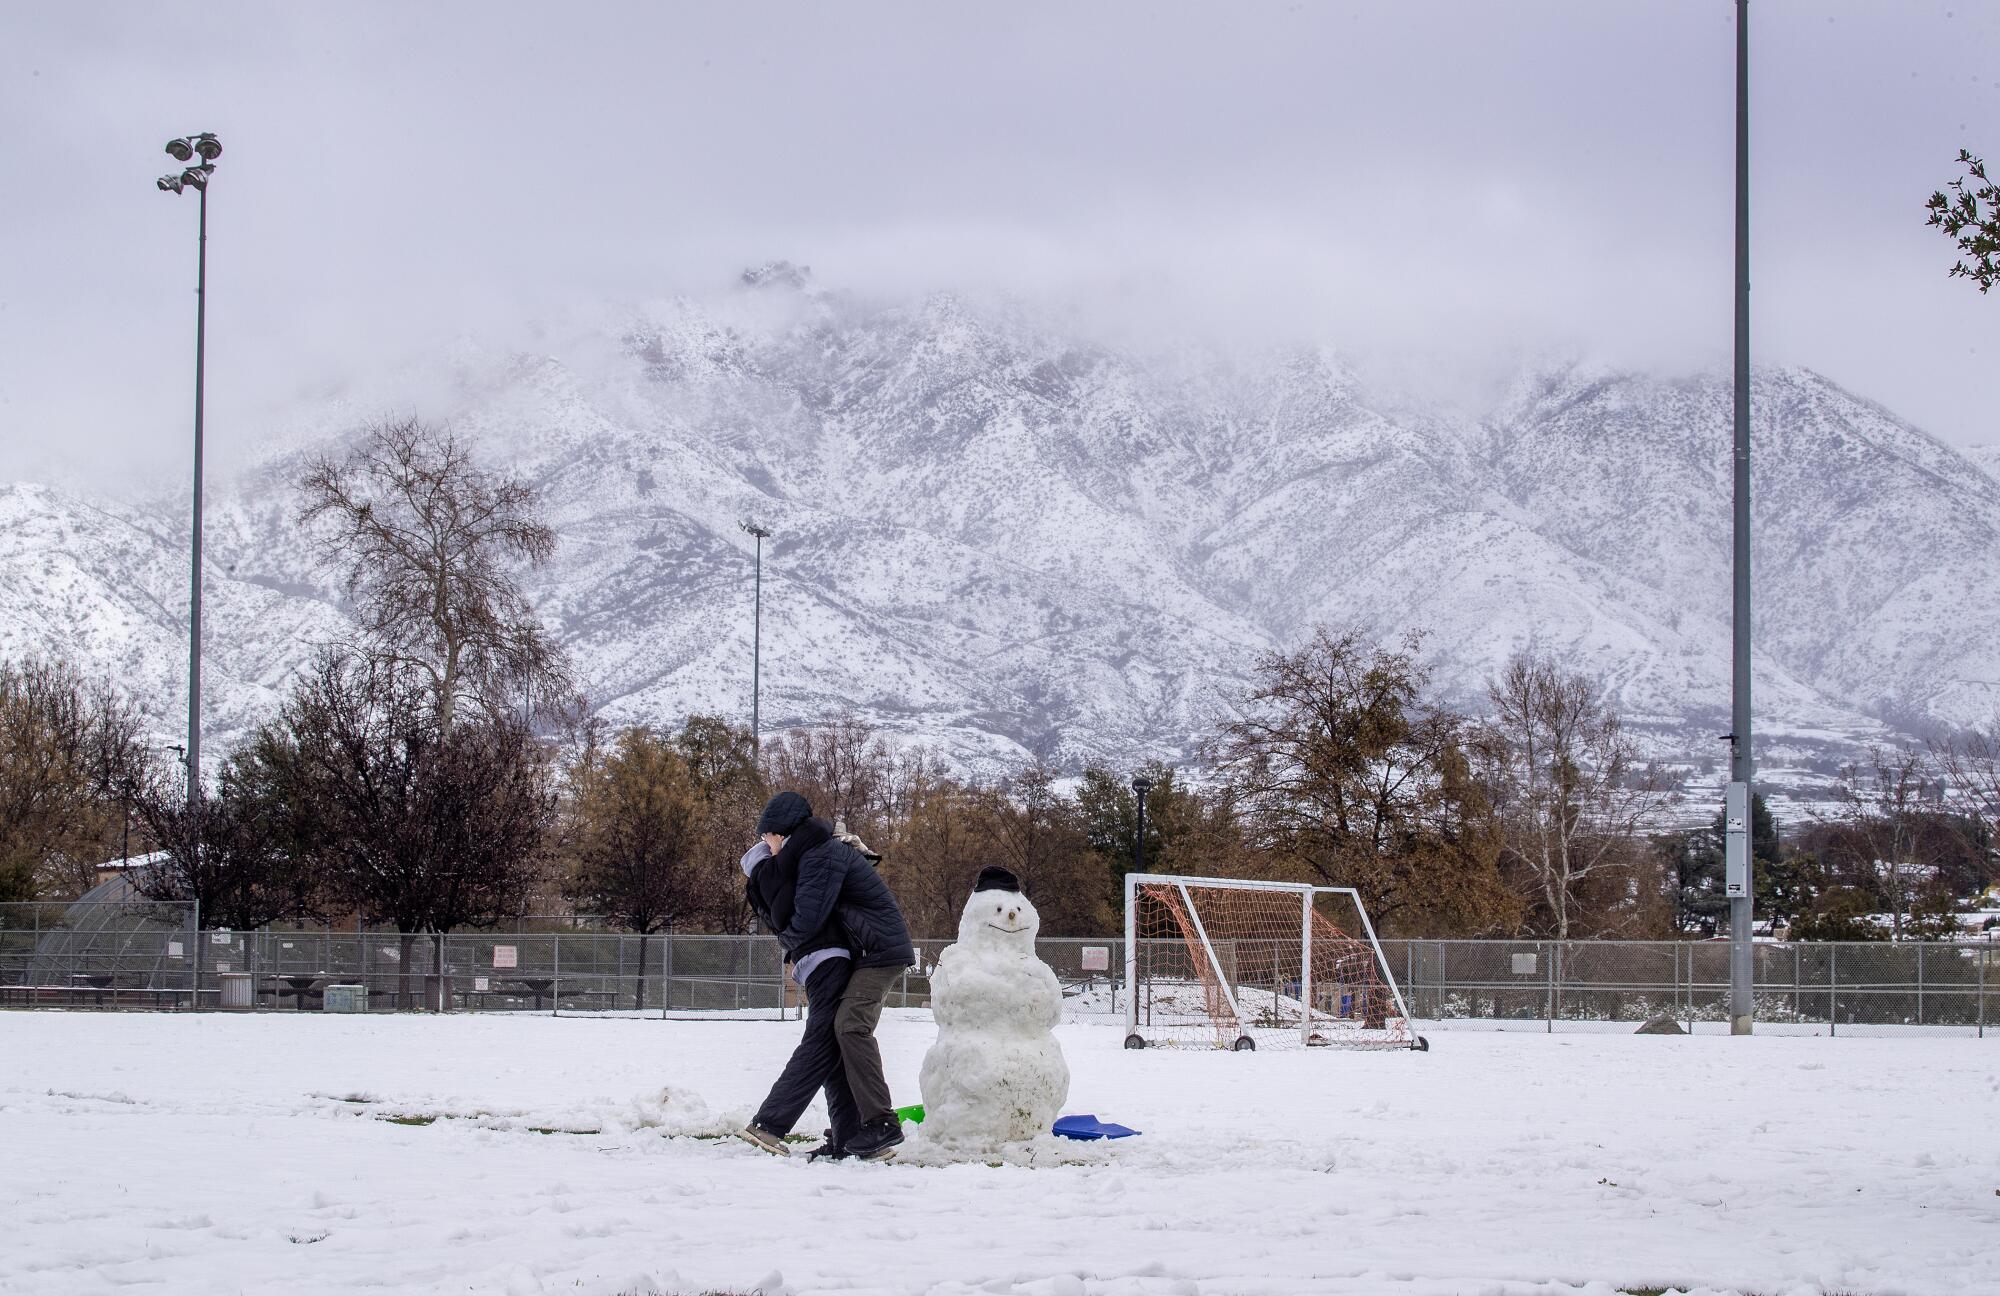 Two people hug next to a snowman on a snow-covered soccer field